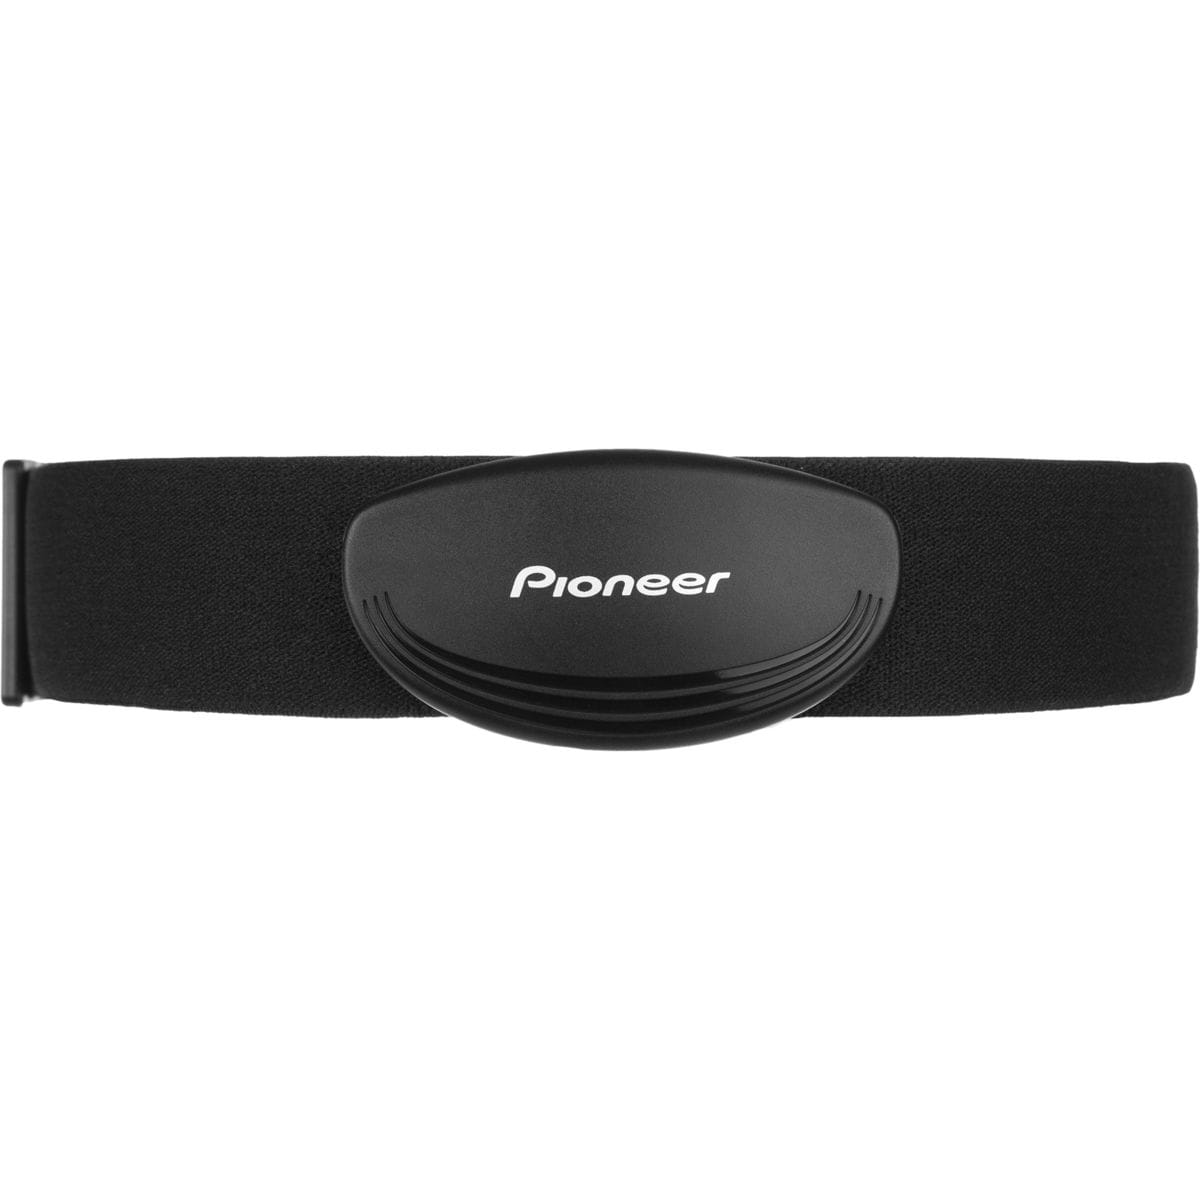 Pioneer Ant+ Heart Rate Monitor